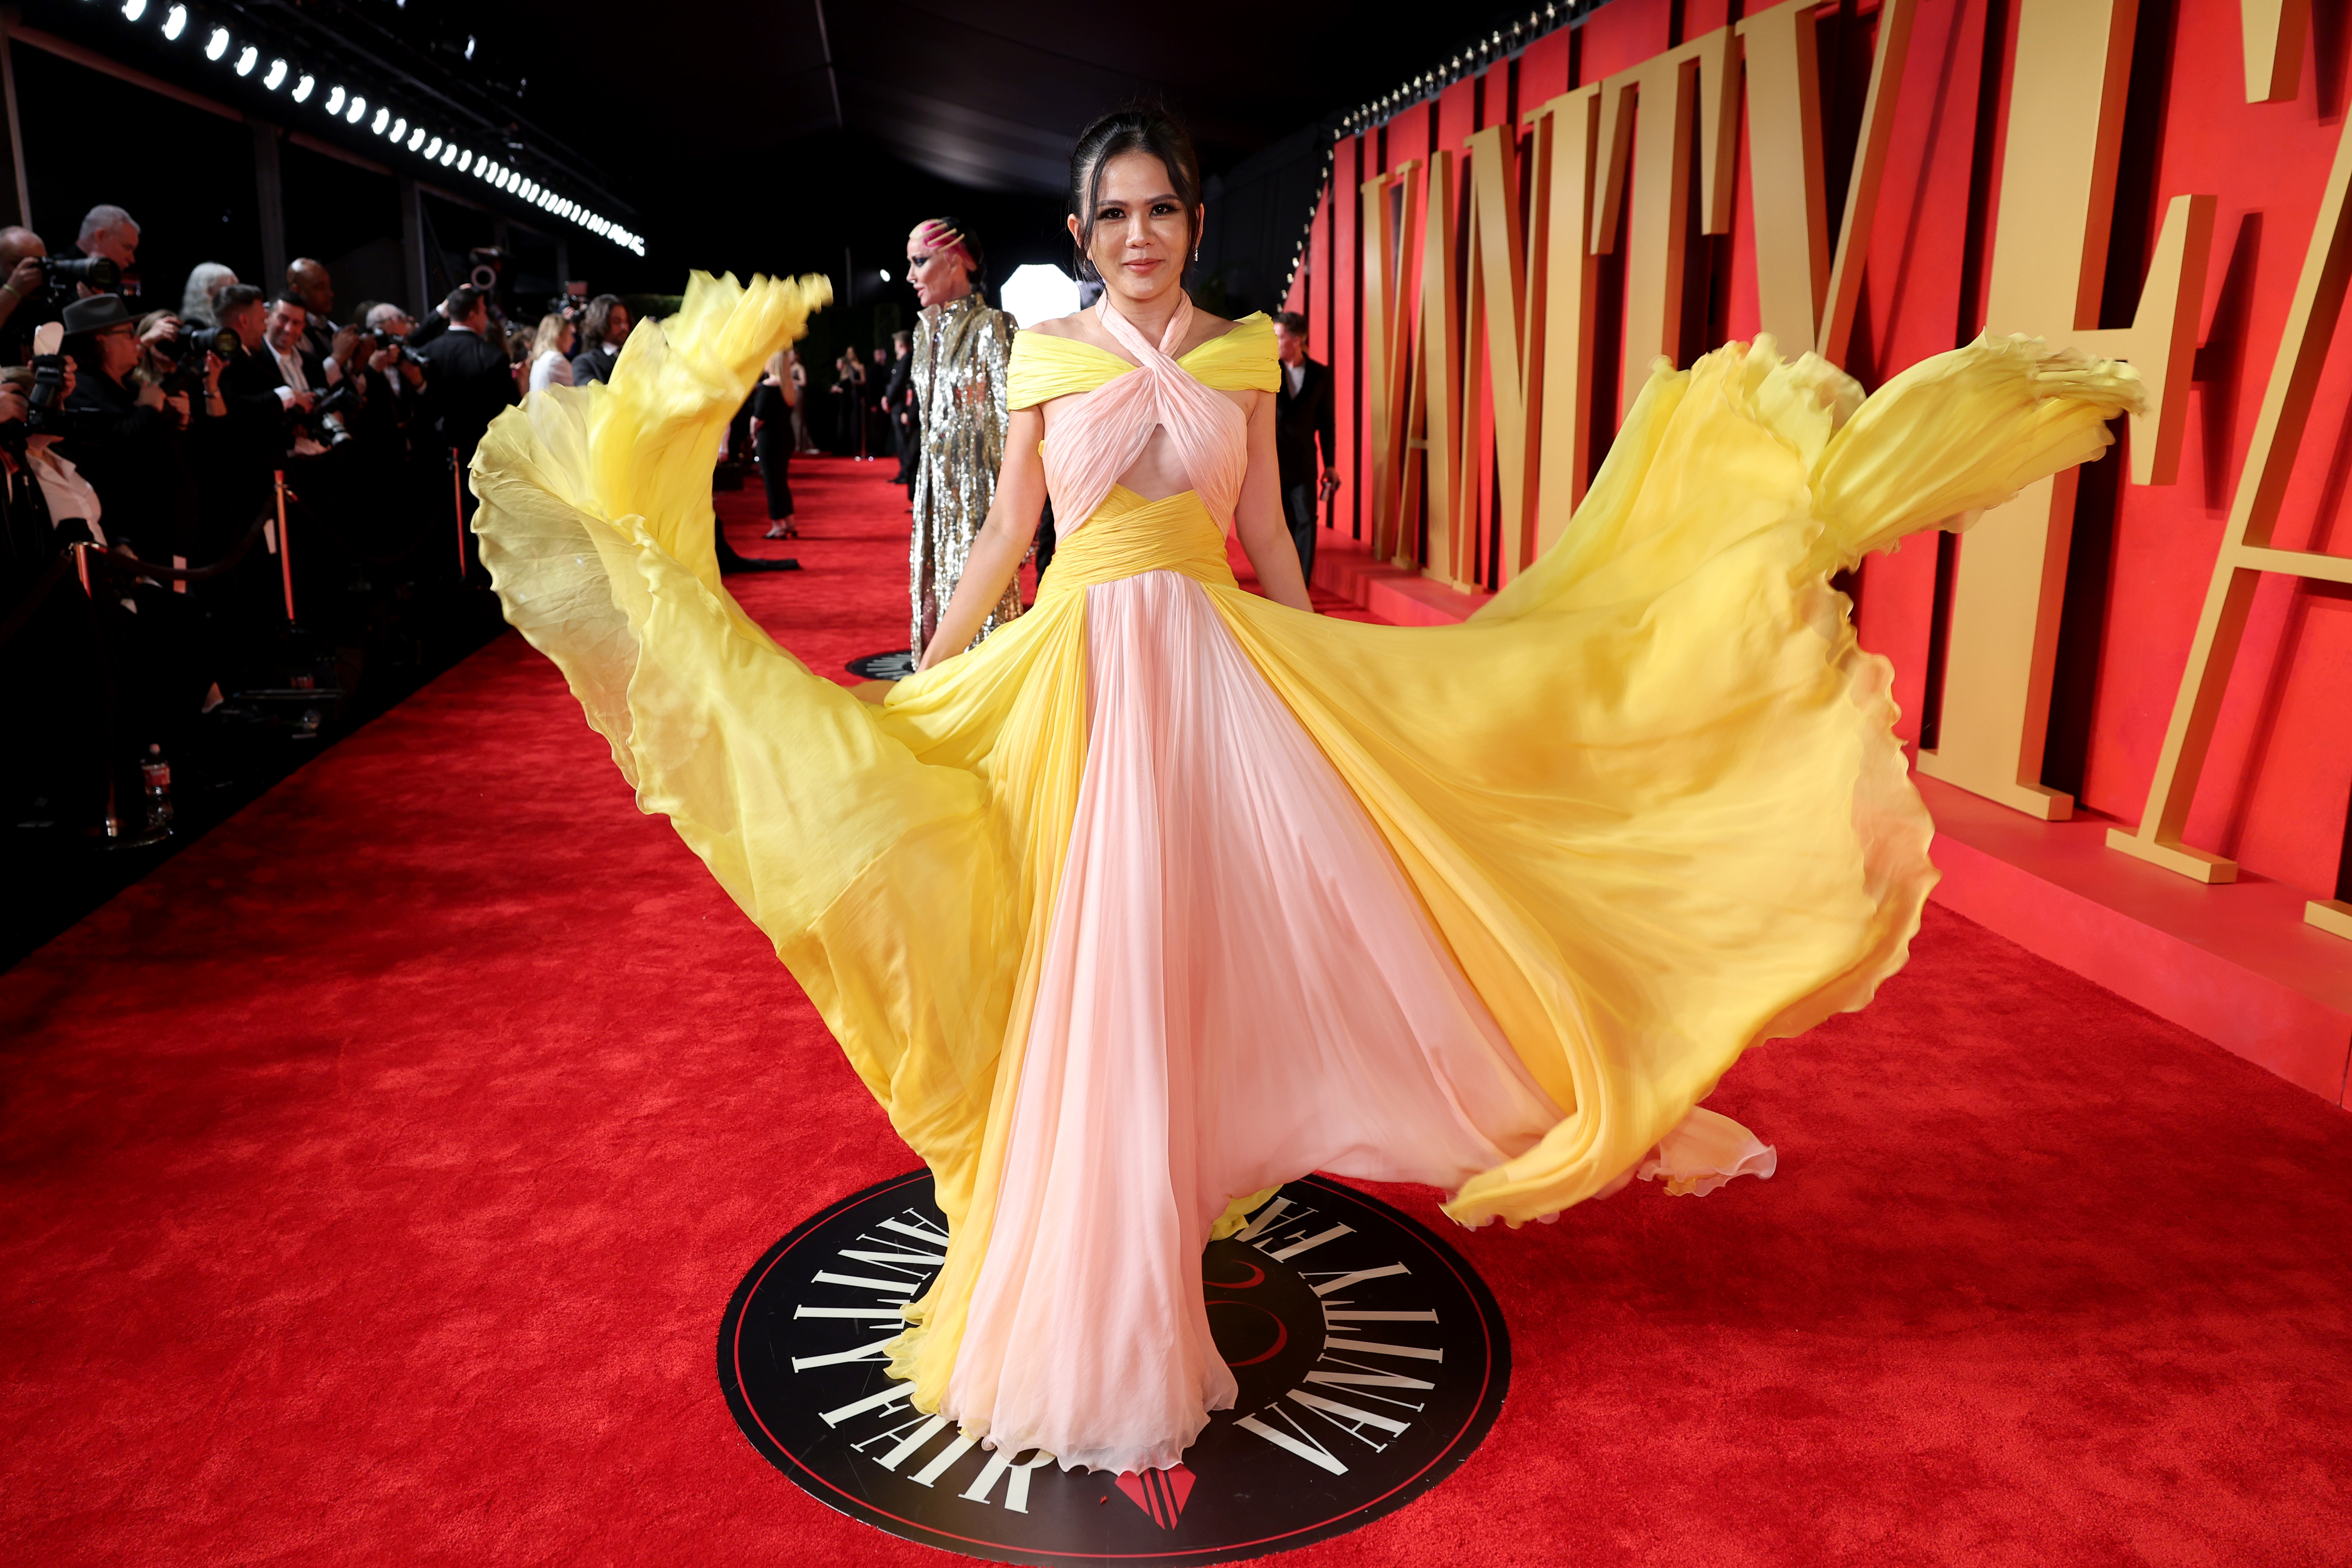 Nichapat Suphap in a yellow and pink flowy dress on a red carpet. 